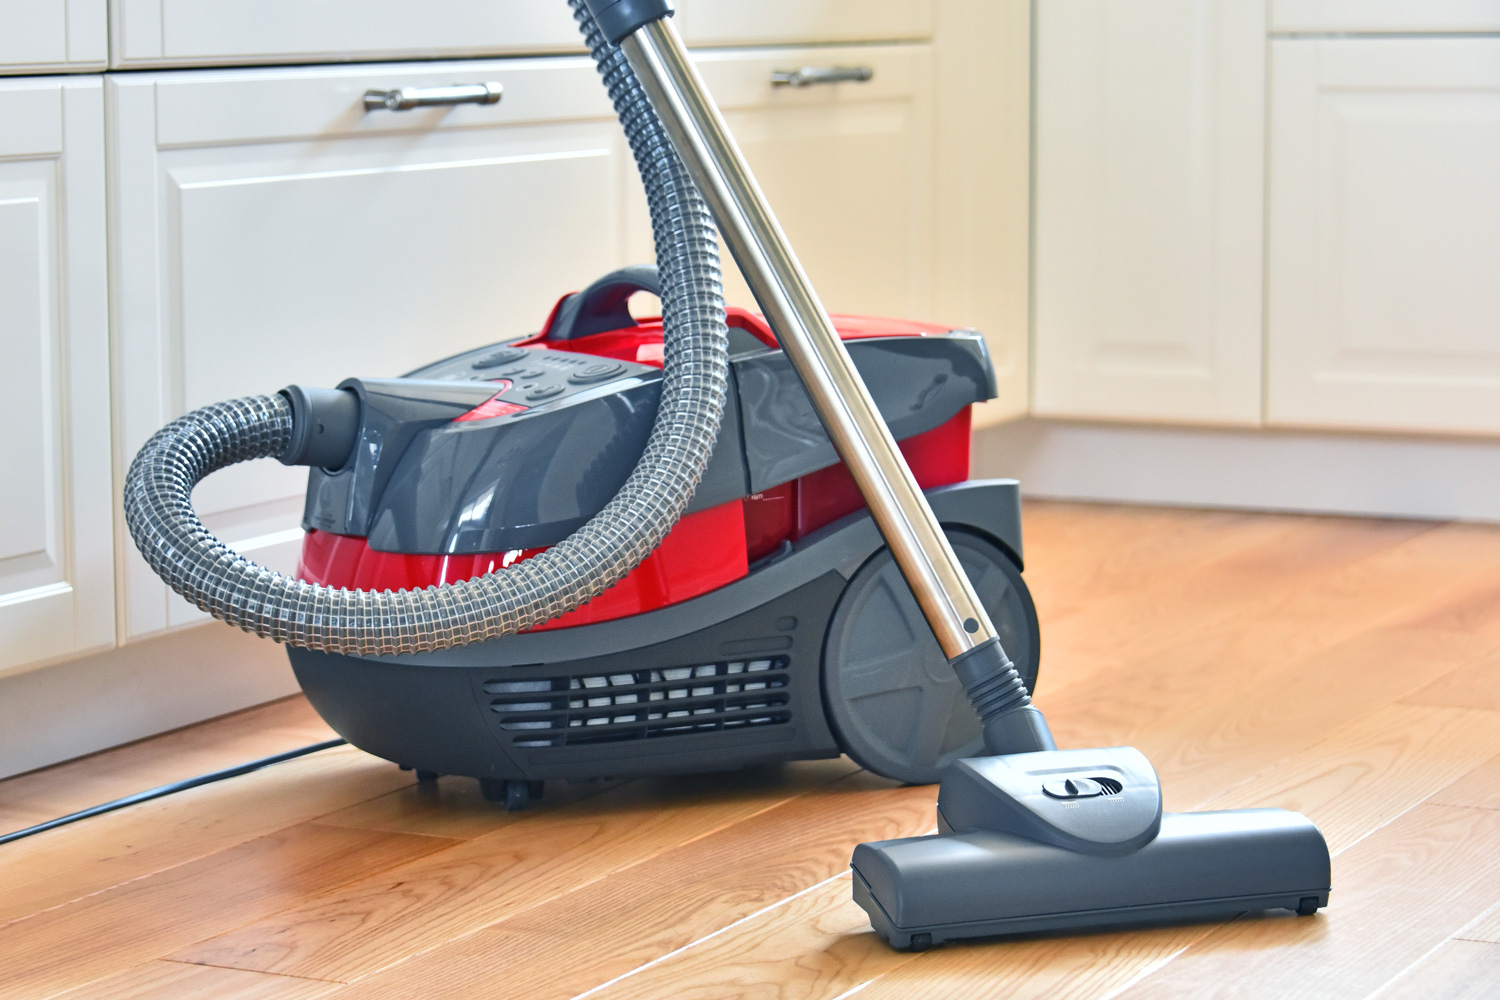 Canister vacuum cleaner for home use on the floor in the apartment.